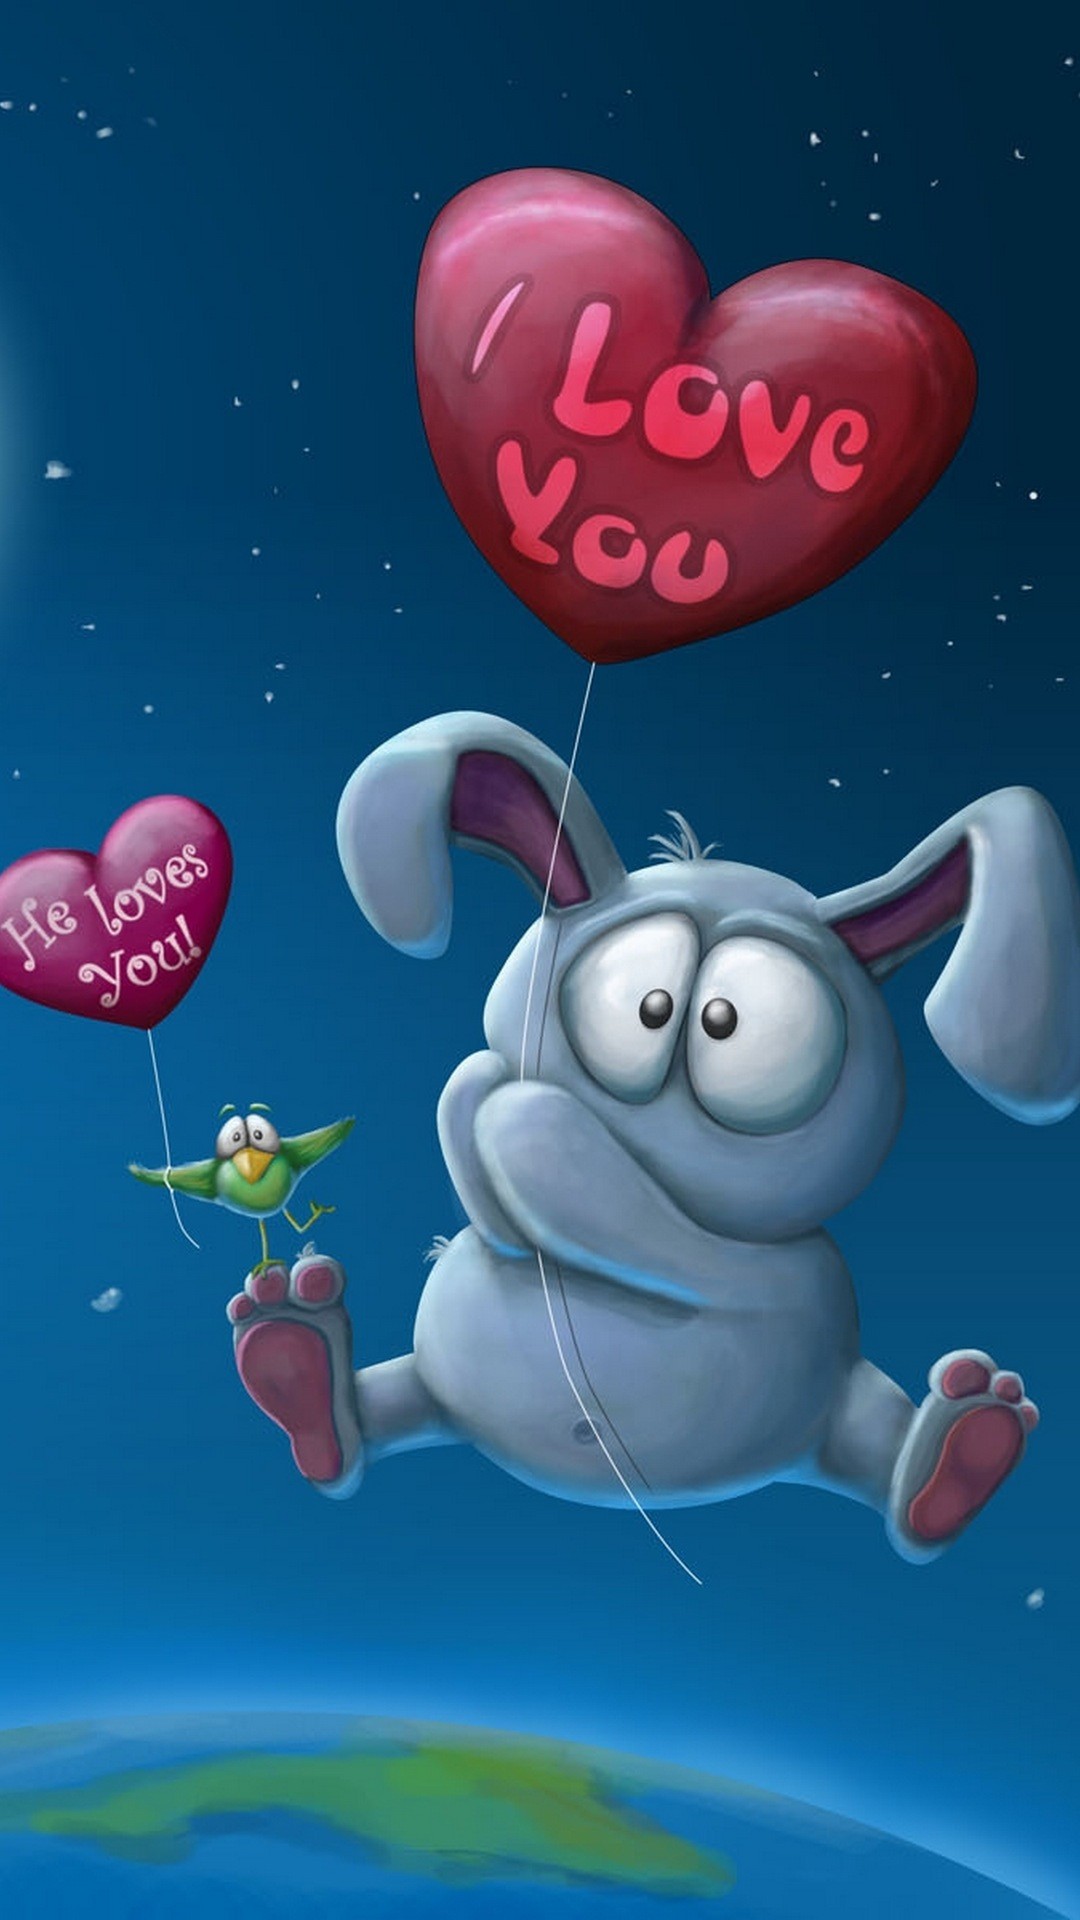 1080x1920 Best Valentines Day Live Wallpapers for Android Mobile Phones